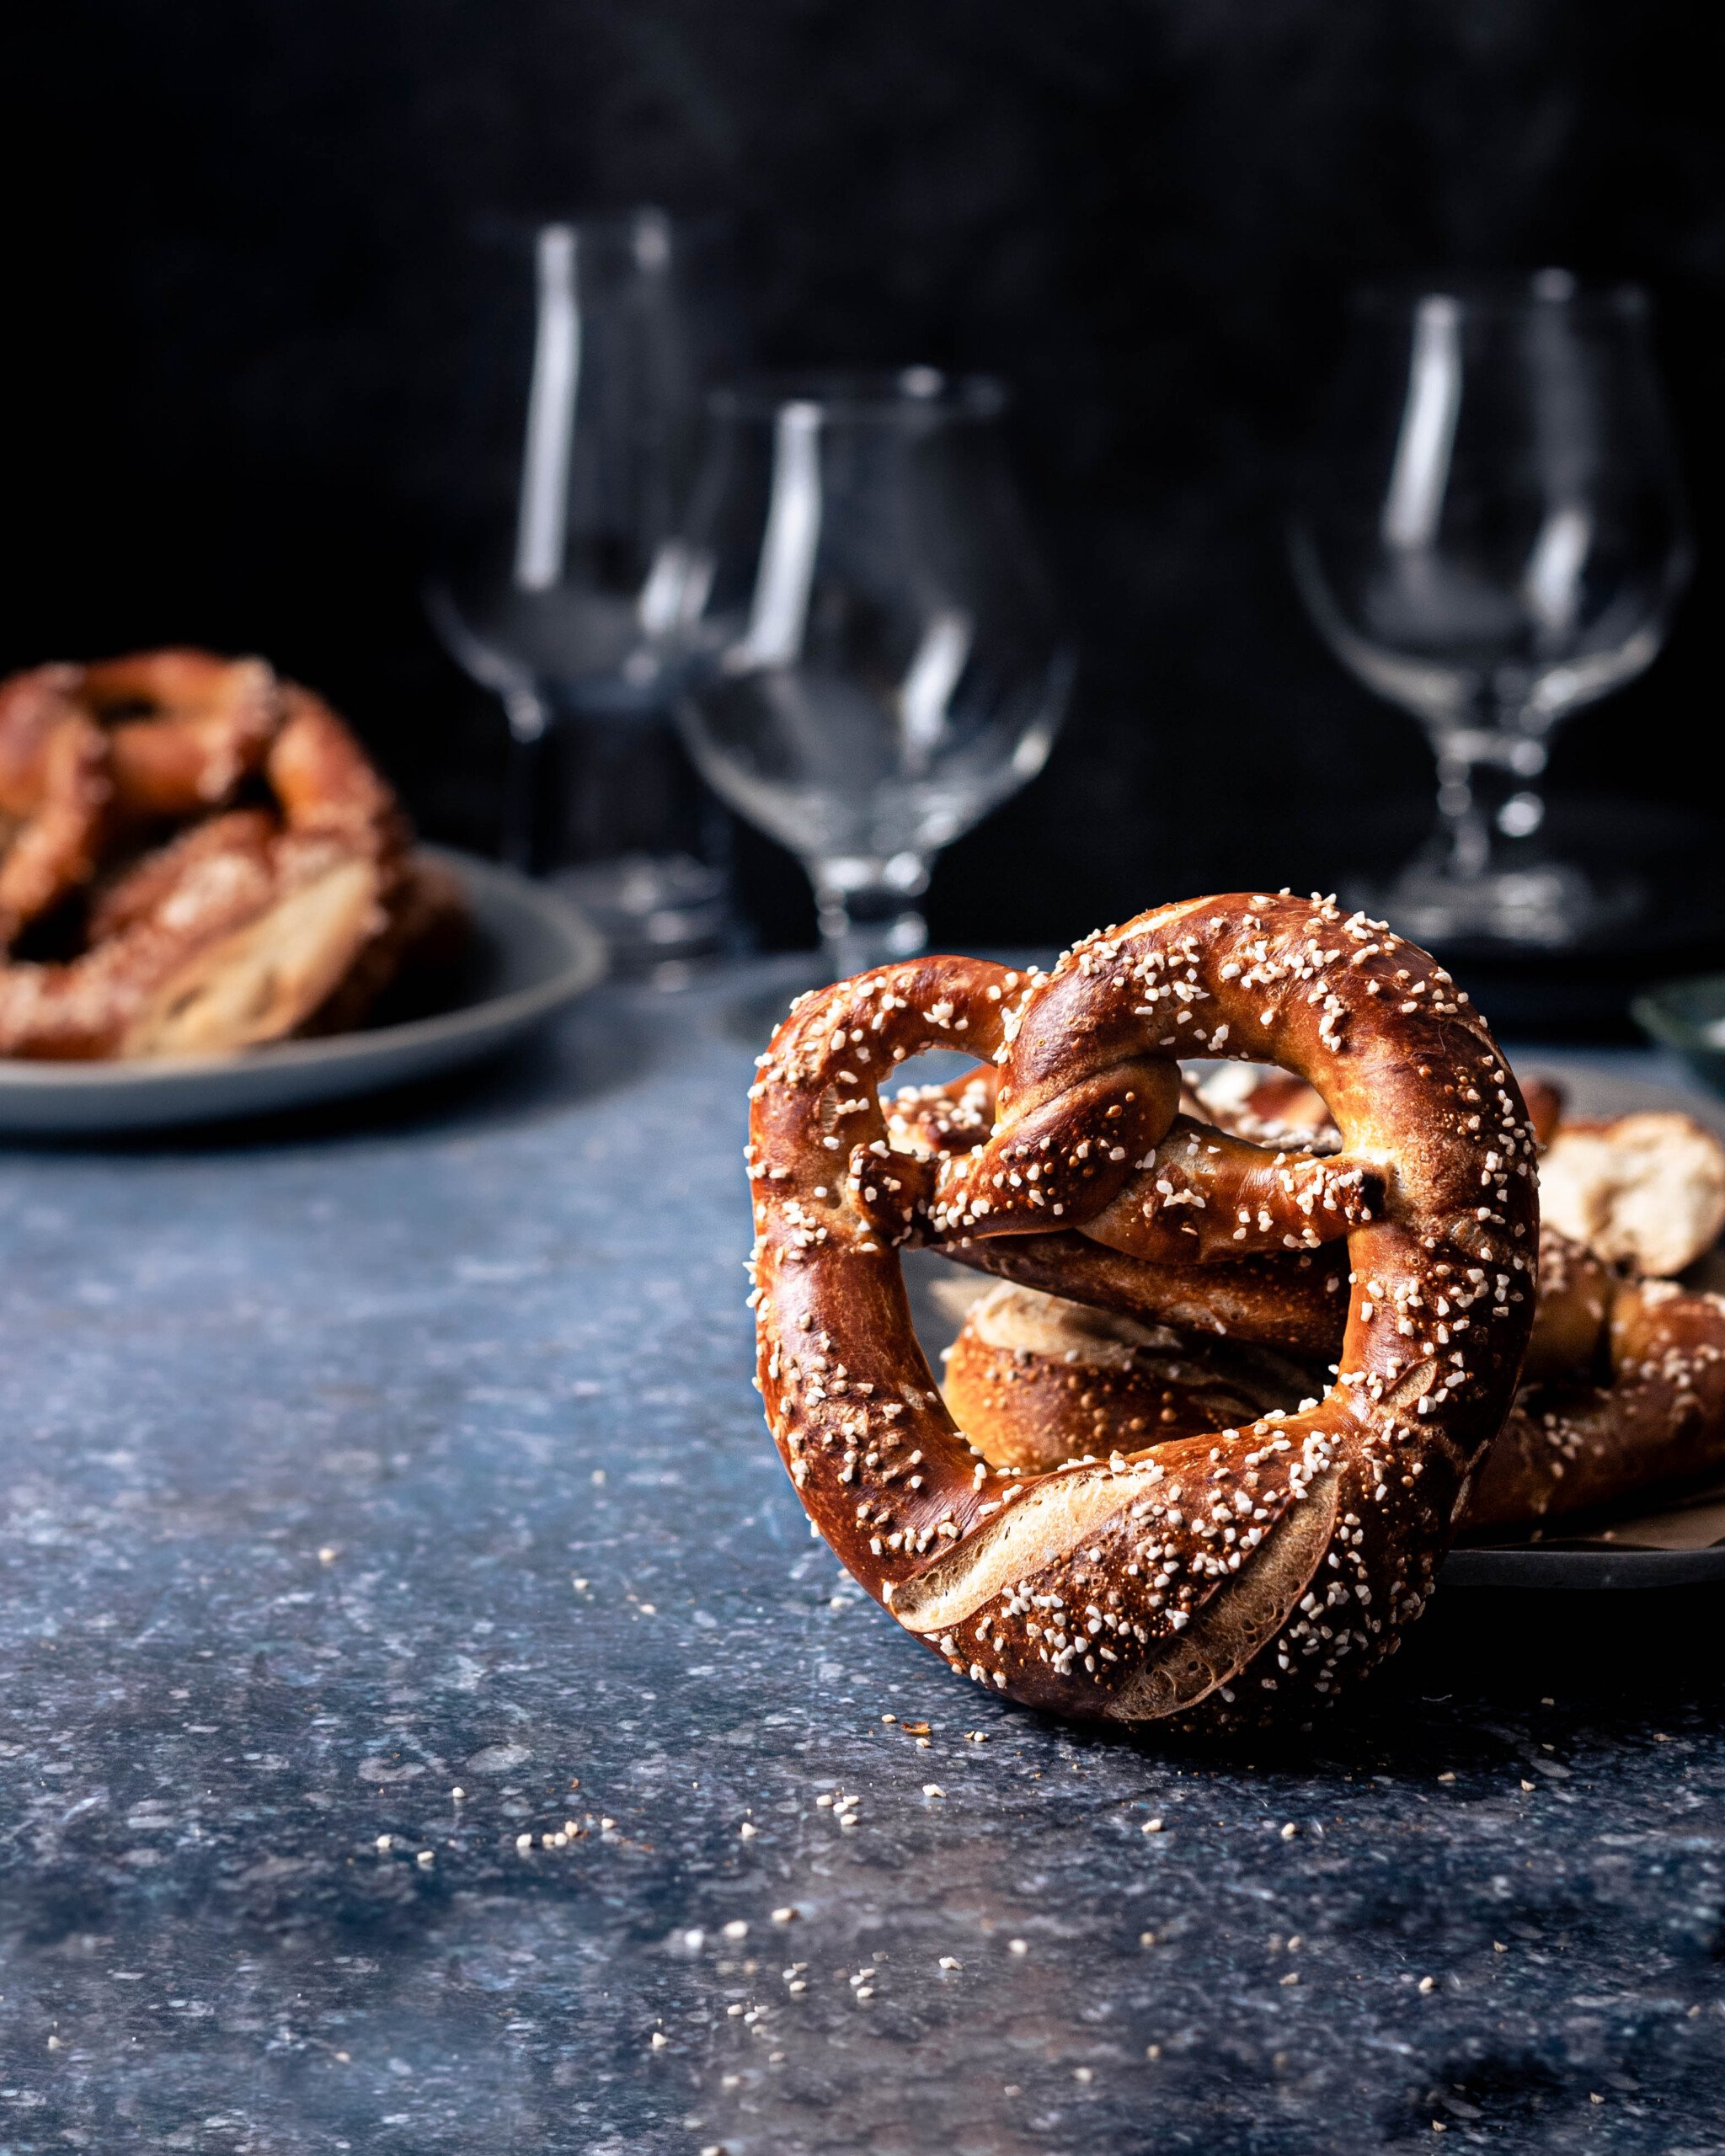 Salted sourdough pretzels with beer glasses in the background